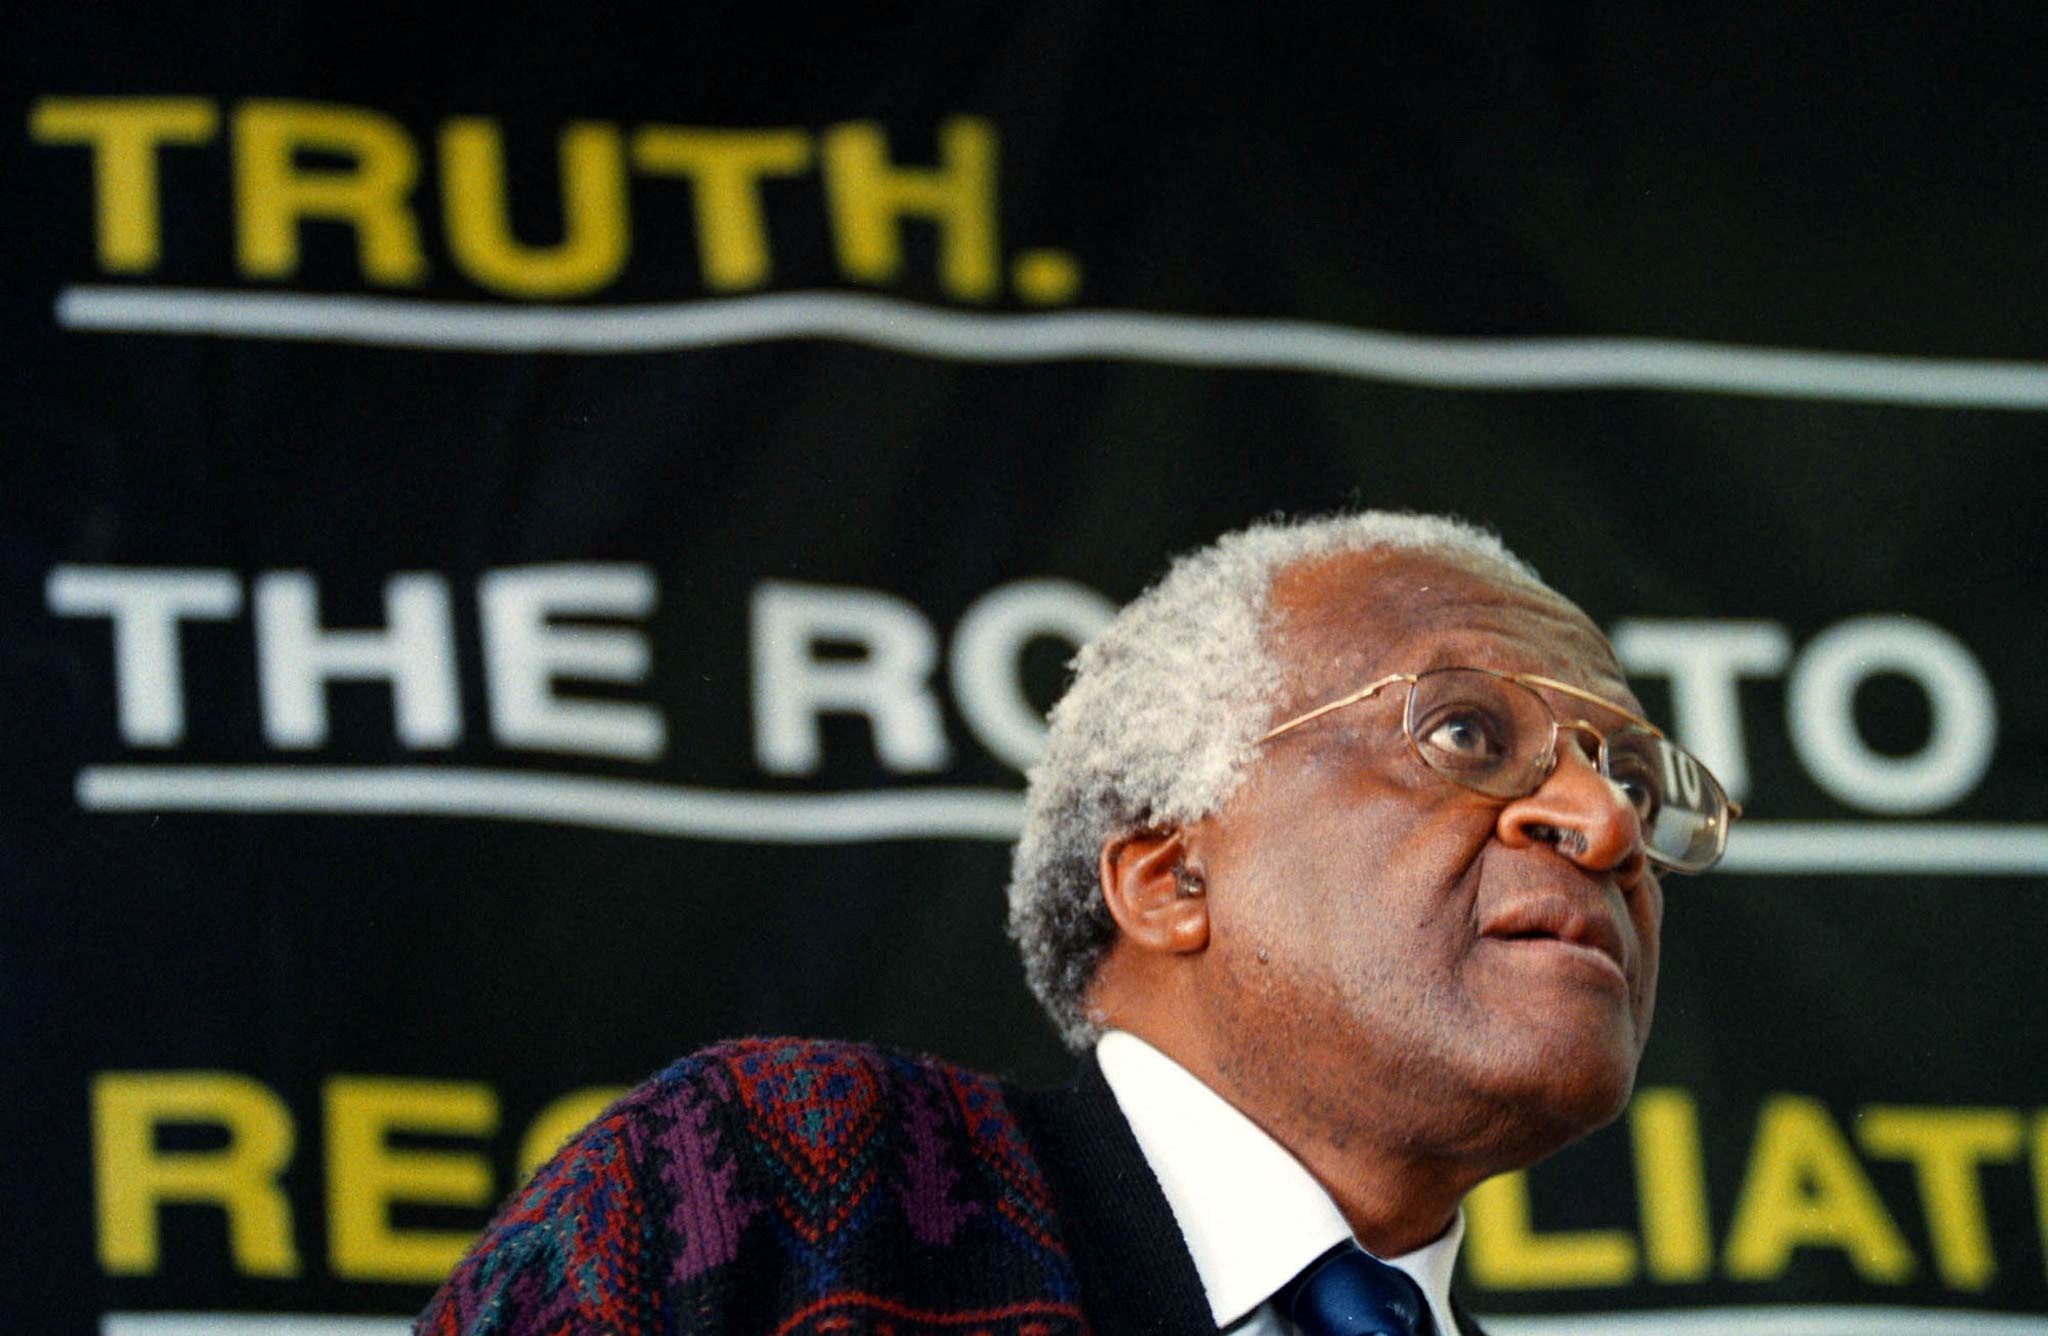 South Africa's Tutu: Anti-apartheid hero who never stopped fighting for 'Rainbow Nation'